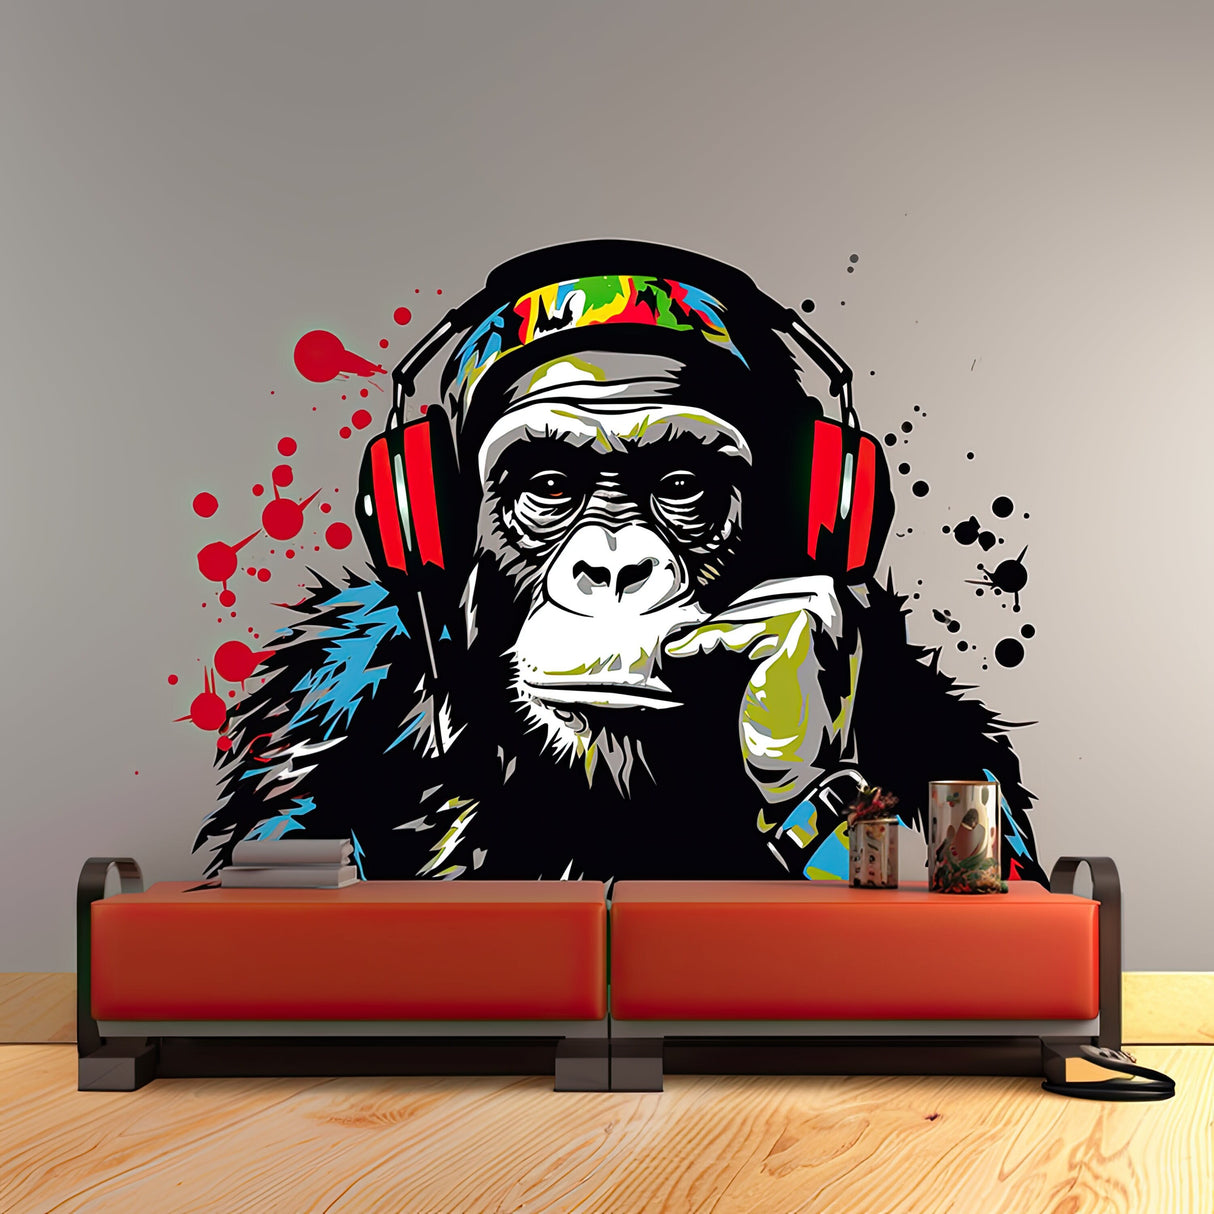 Wise Contemplative Ape with Tunes Wall Decal - Music